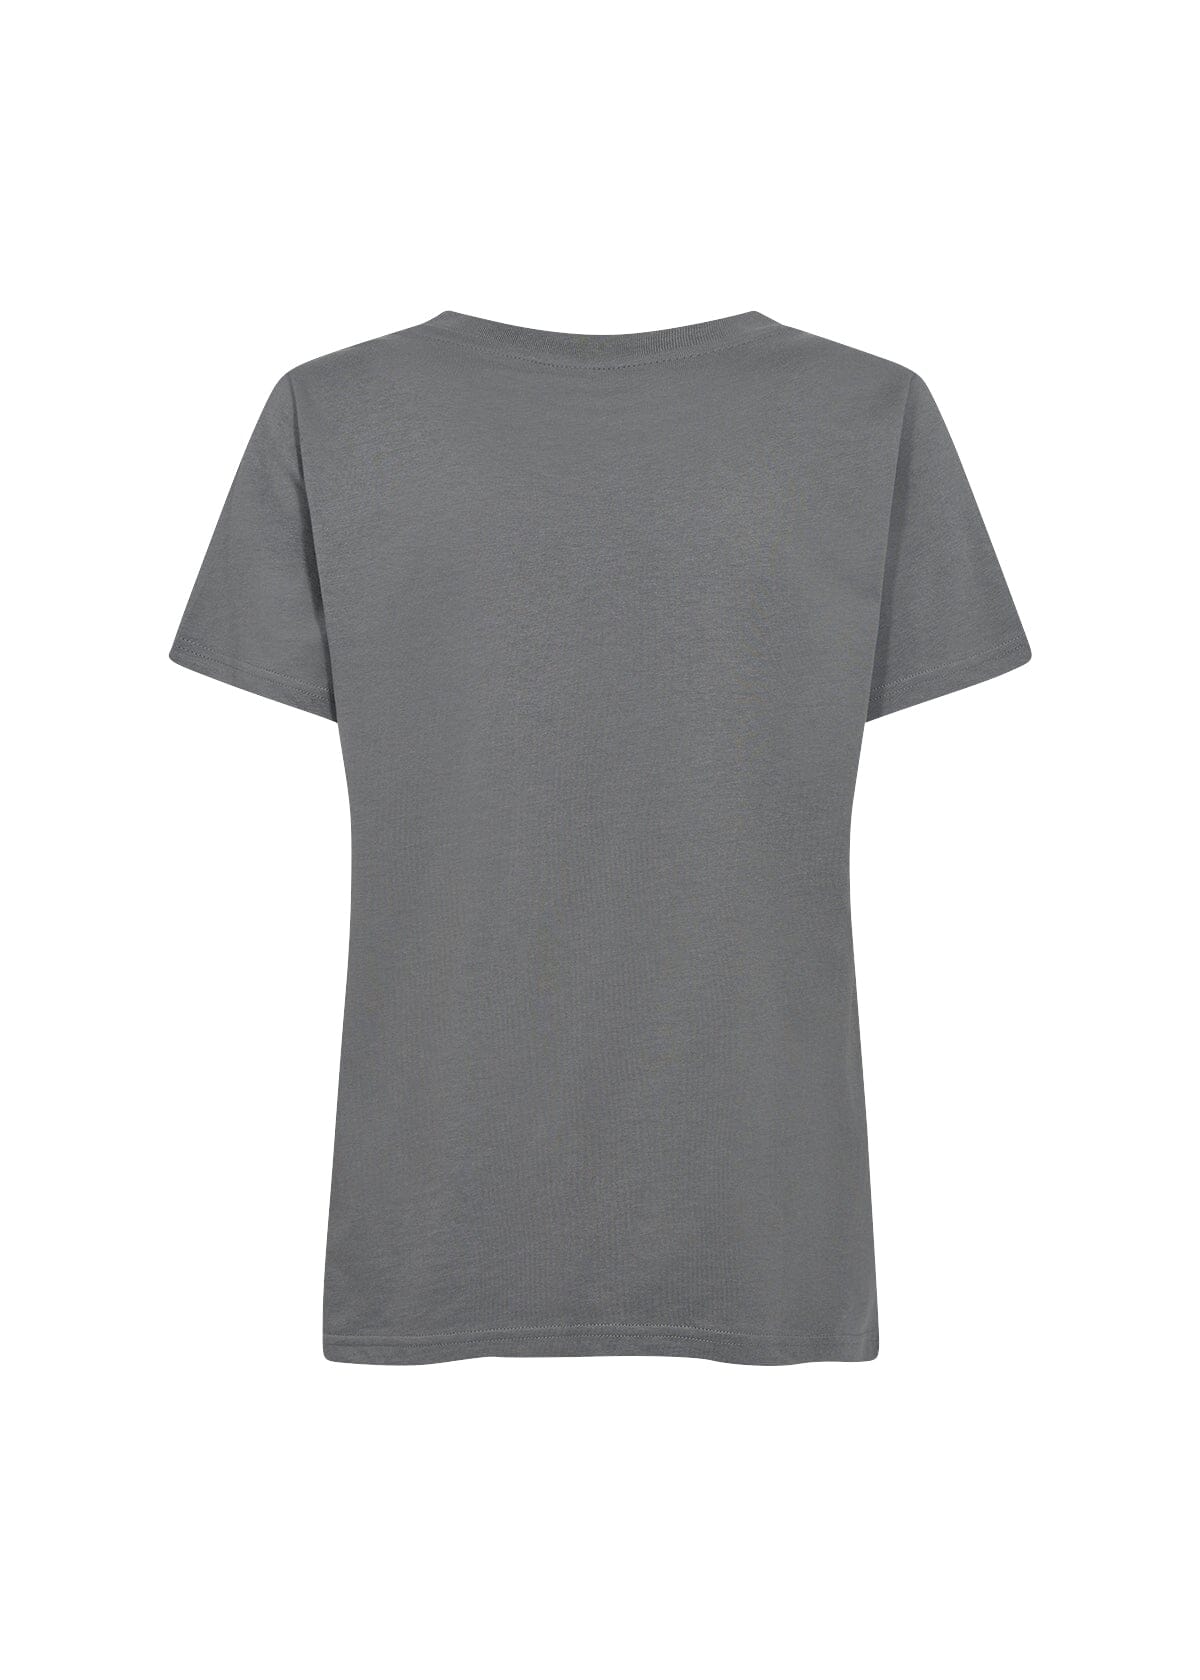 Derby T-Shirt in Misty T-Shirt Soyaconcept 